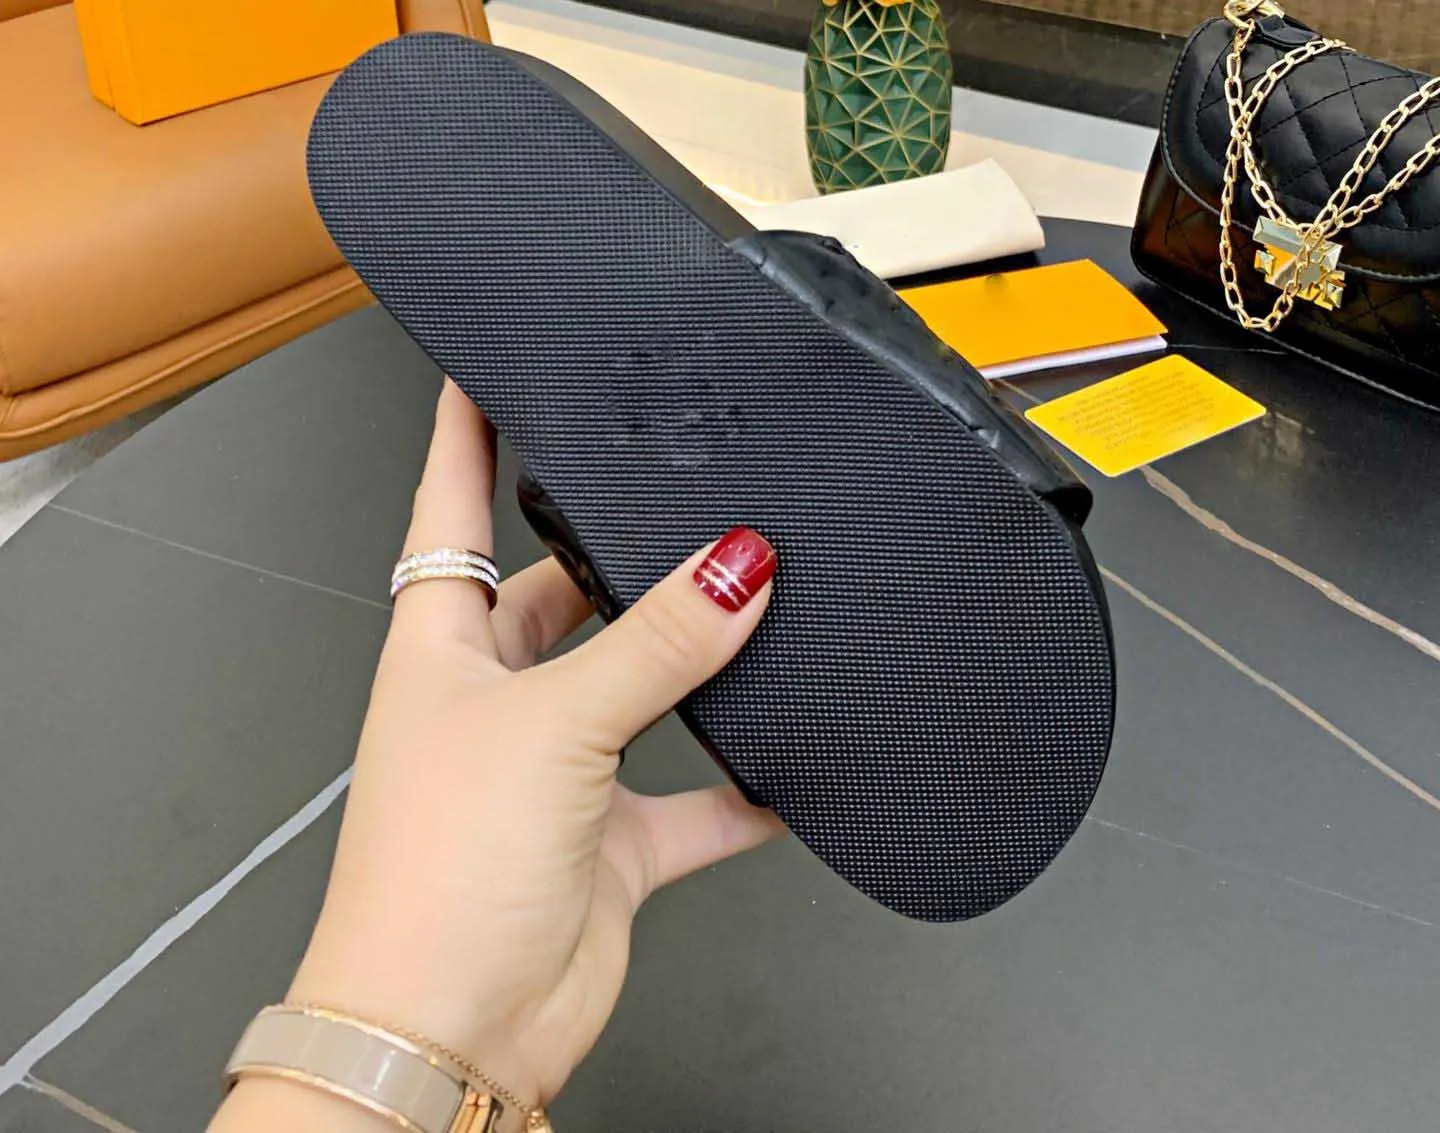 2021 Womens Pillow Slippers Jumbo FlaTForm Summer Rubber Sandals Beach Slide Fashion Flat Embossed Leather Scuffs Indoor Shoes With Box